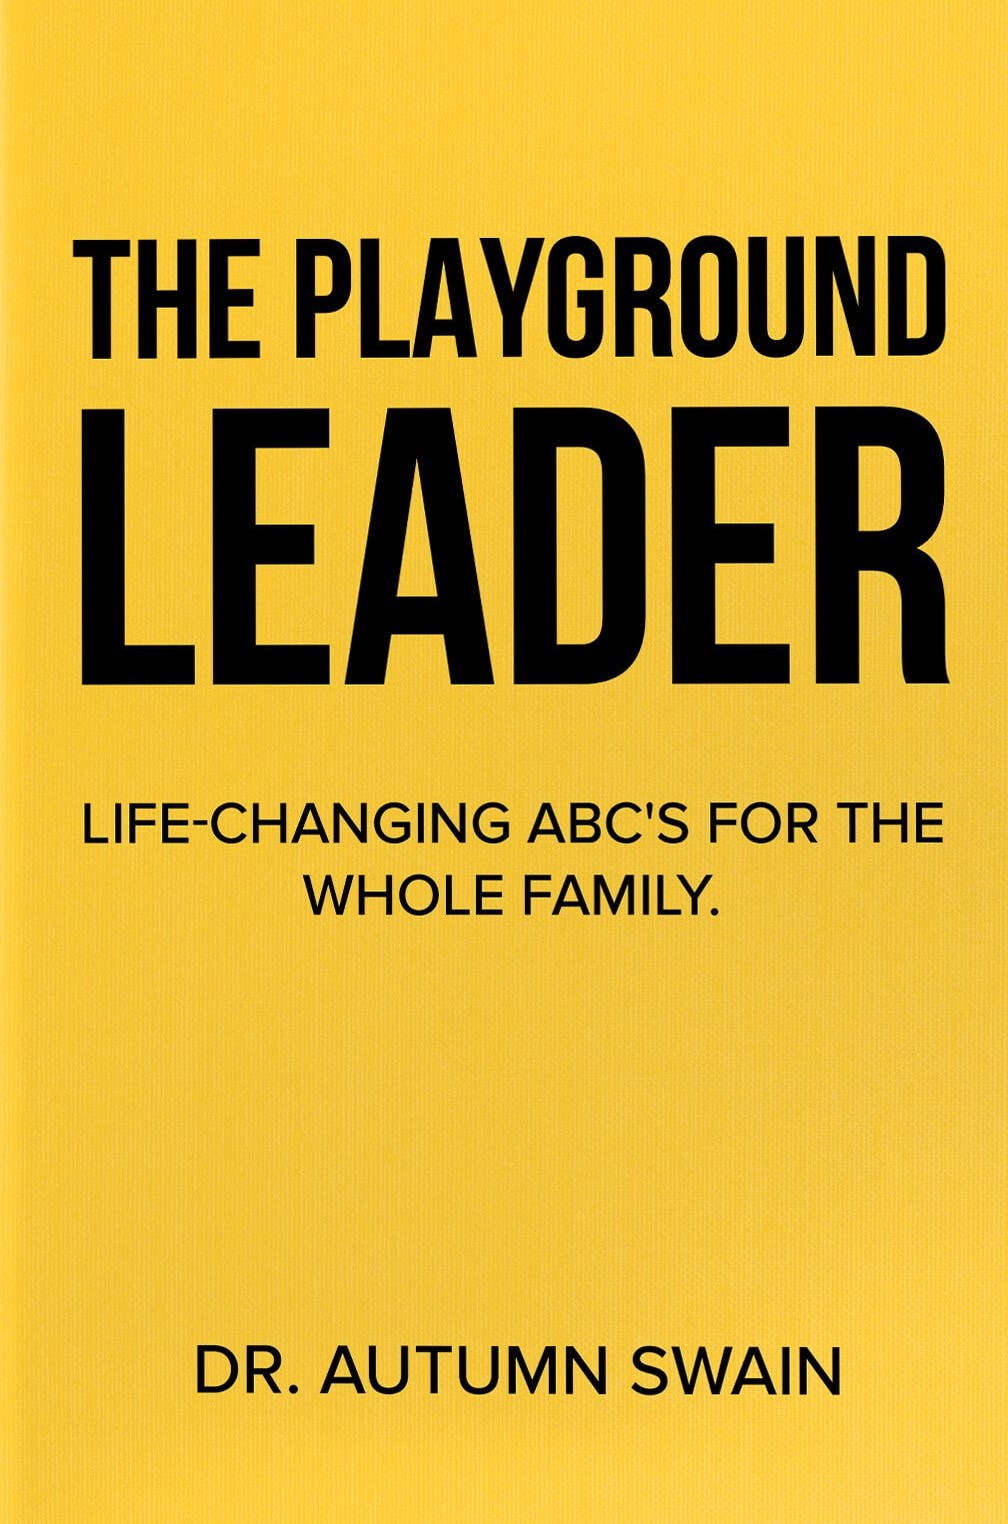 The Playground Leader by Autumn Swain